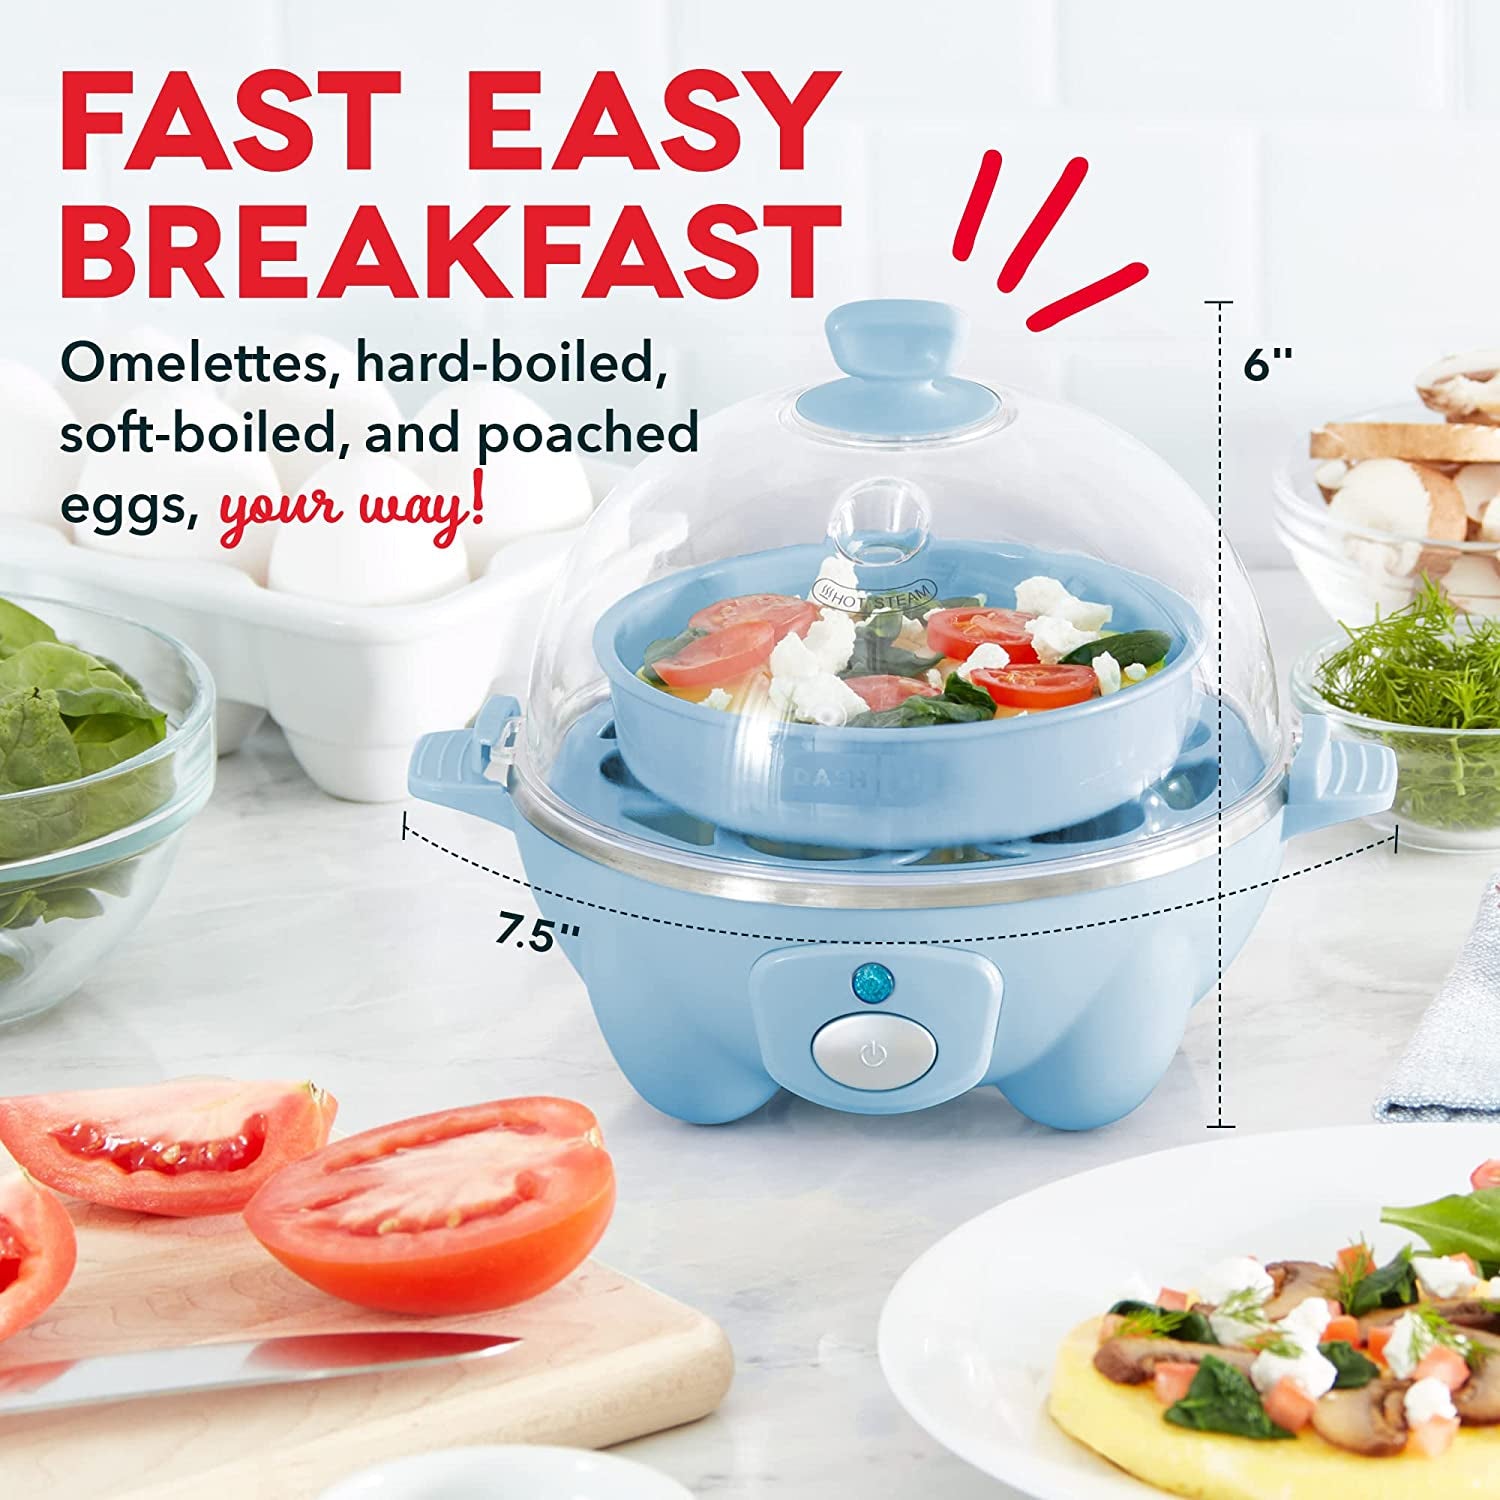 Rapid Egg Cooker: 6 Egg Capacity Electric Egg Cooker for Hard Boiled Eggs, Poached Eggs, Scrambled Eggs, or Omelets with Auto Shut off Feature - Dream Blue